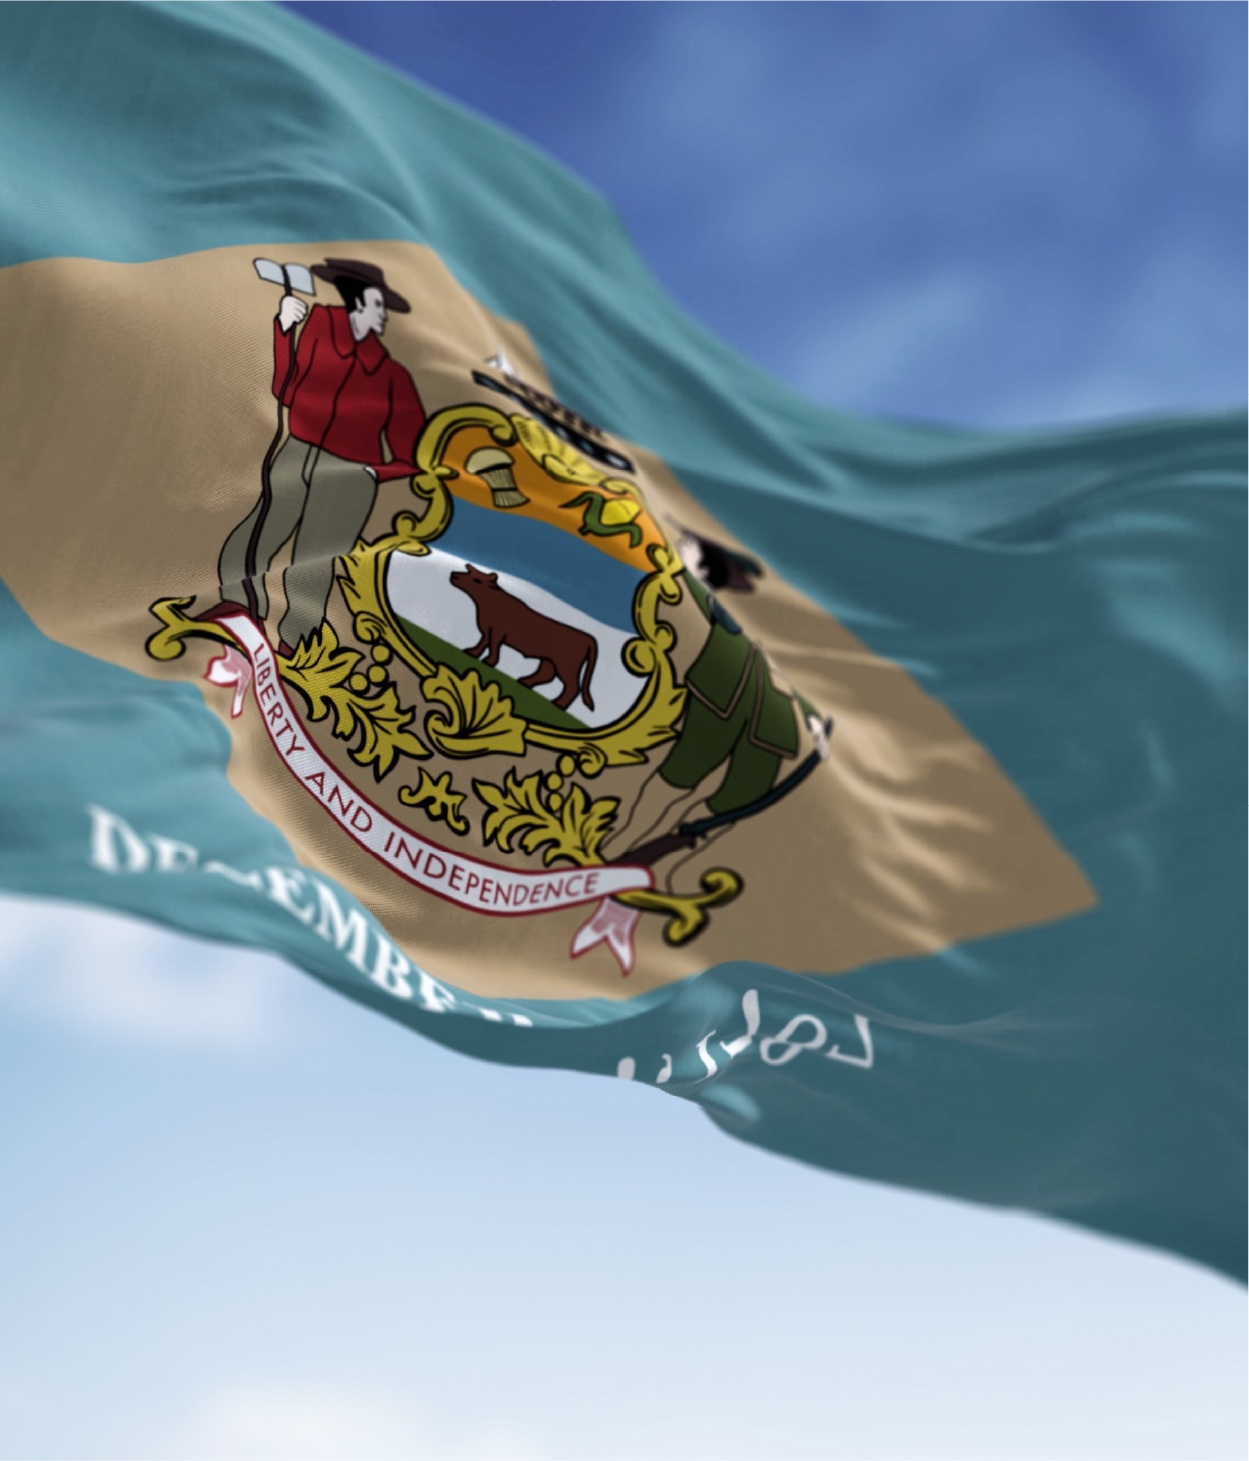 Closeup of the Delaware state flag